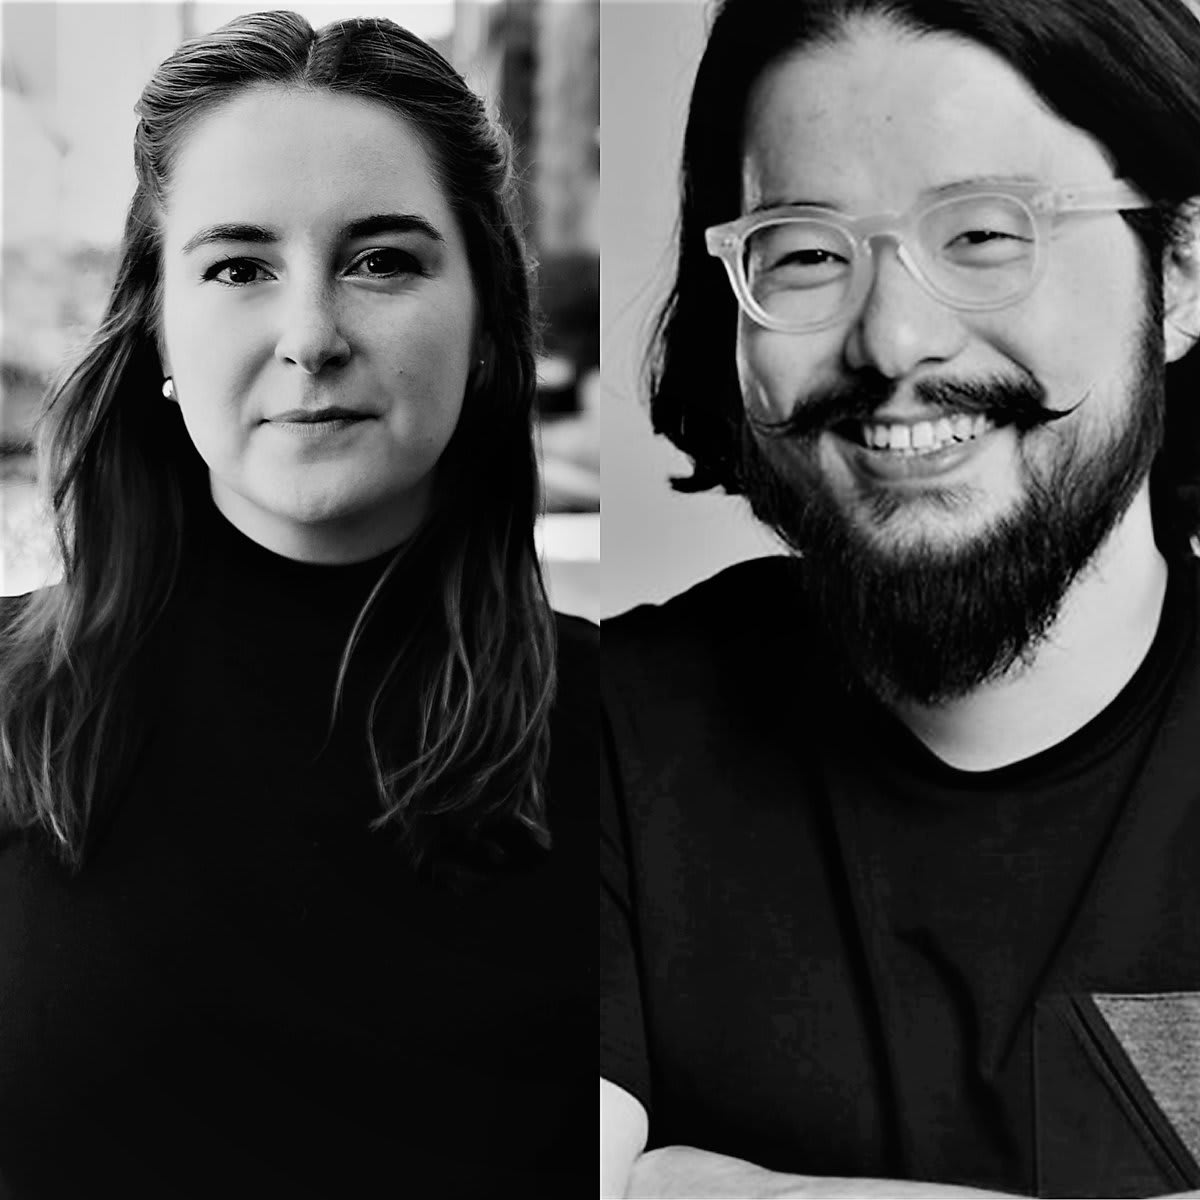 We're proud of IDSA members Meghan Preiss and Sheng-Hung Lee, both nominated for @worlddesignorg's Board of Directors. WDO member voting begins on February 24. Watch Meghan's nominee video: https://t.co/OB2XfcaDW5 Watch Sheng-Hung's nominee video: